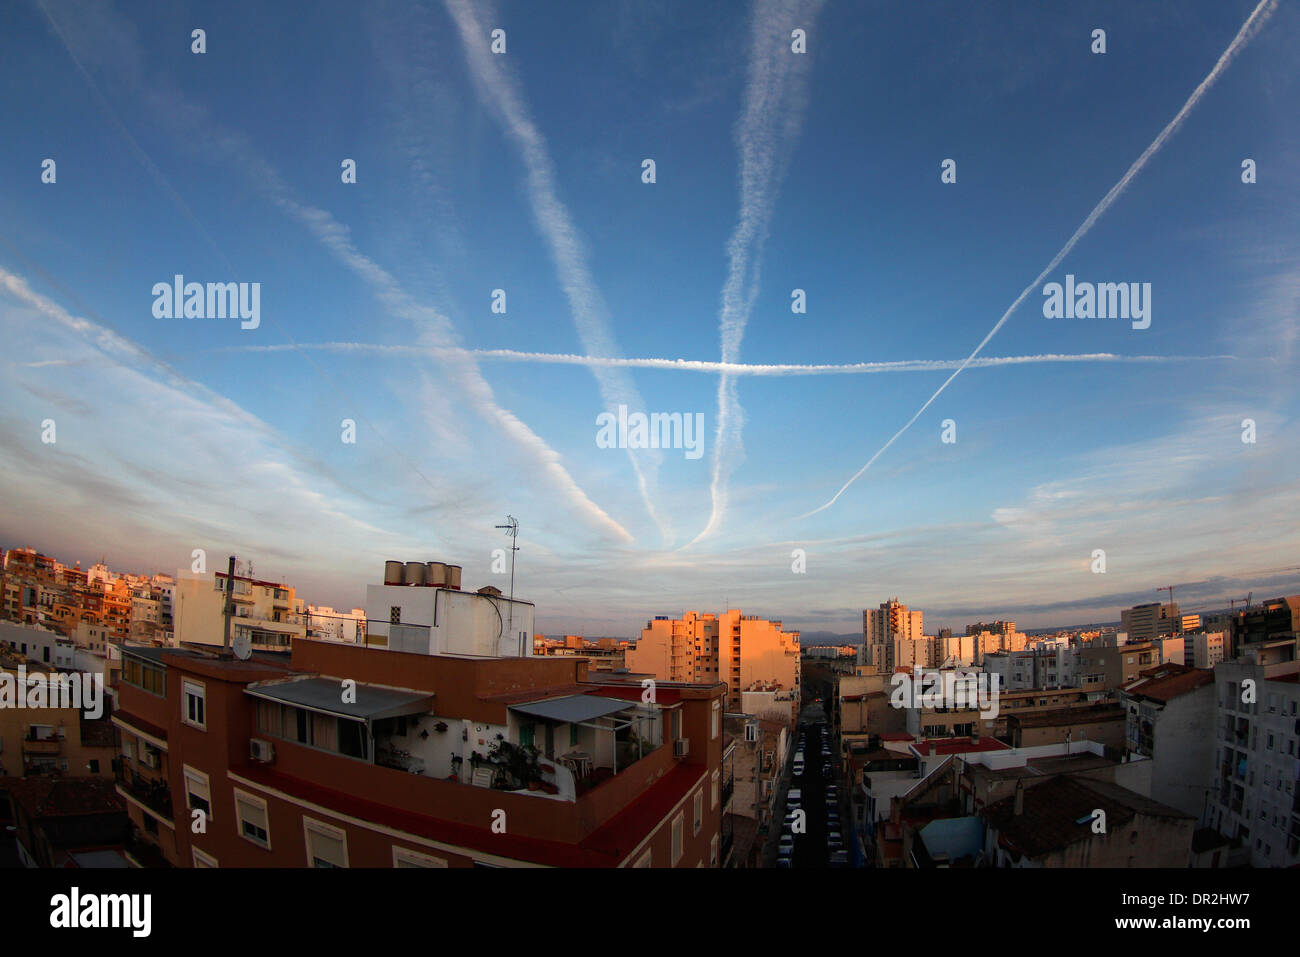 Chemtrails and contrails seen on Palma de Mallorca sky, Spain. Stock Photo